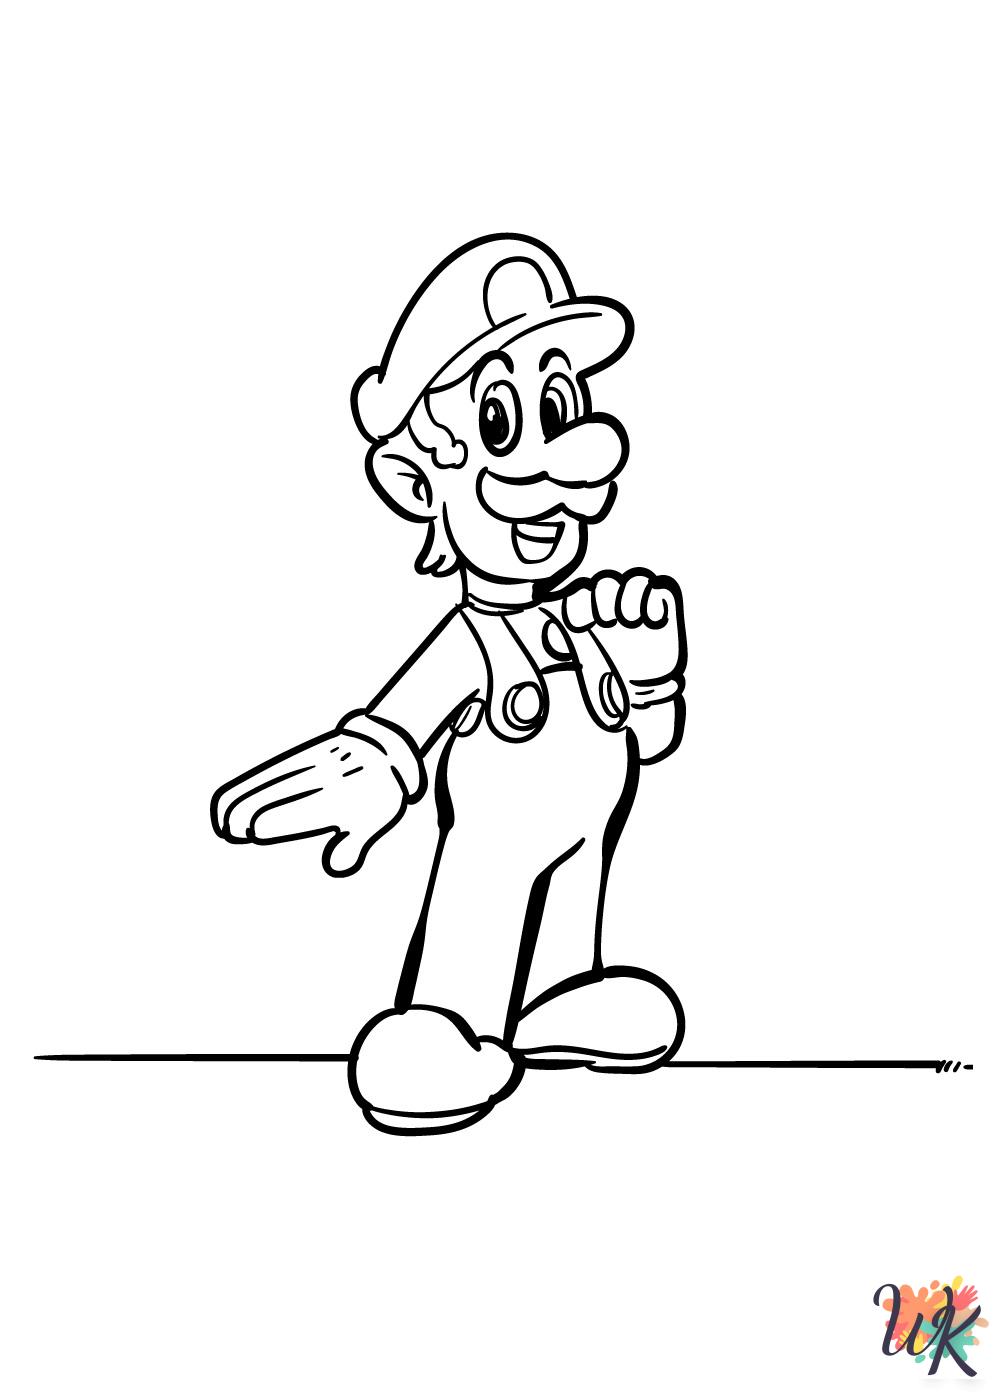 free full size printable Super Mario Bros coloring pages for adults pdf